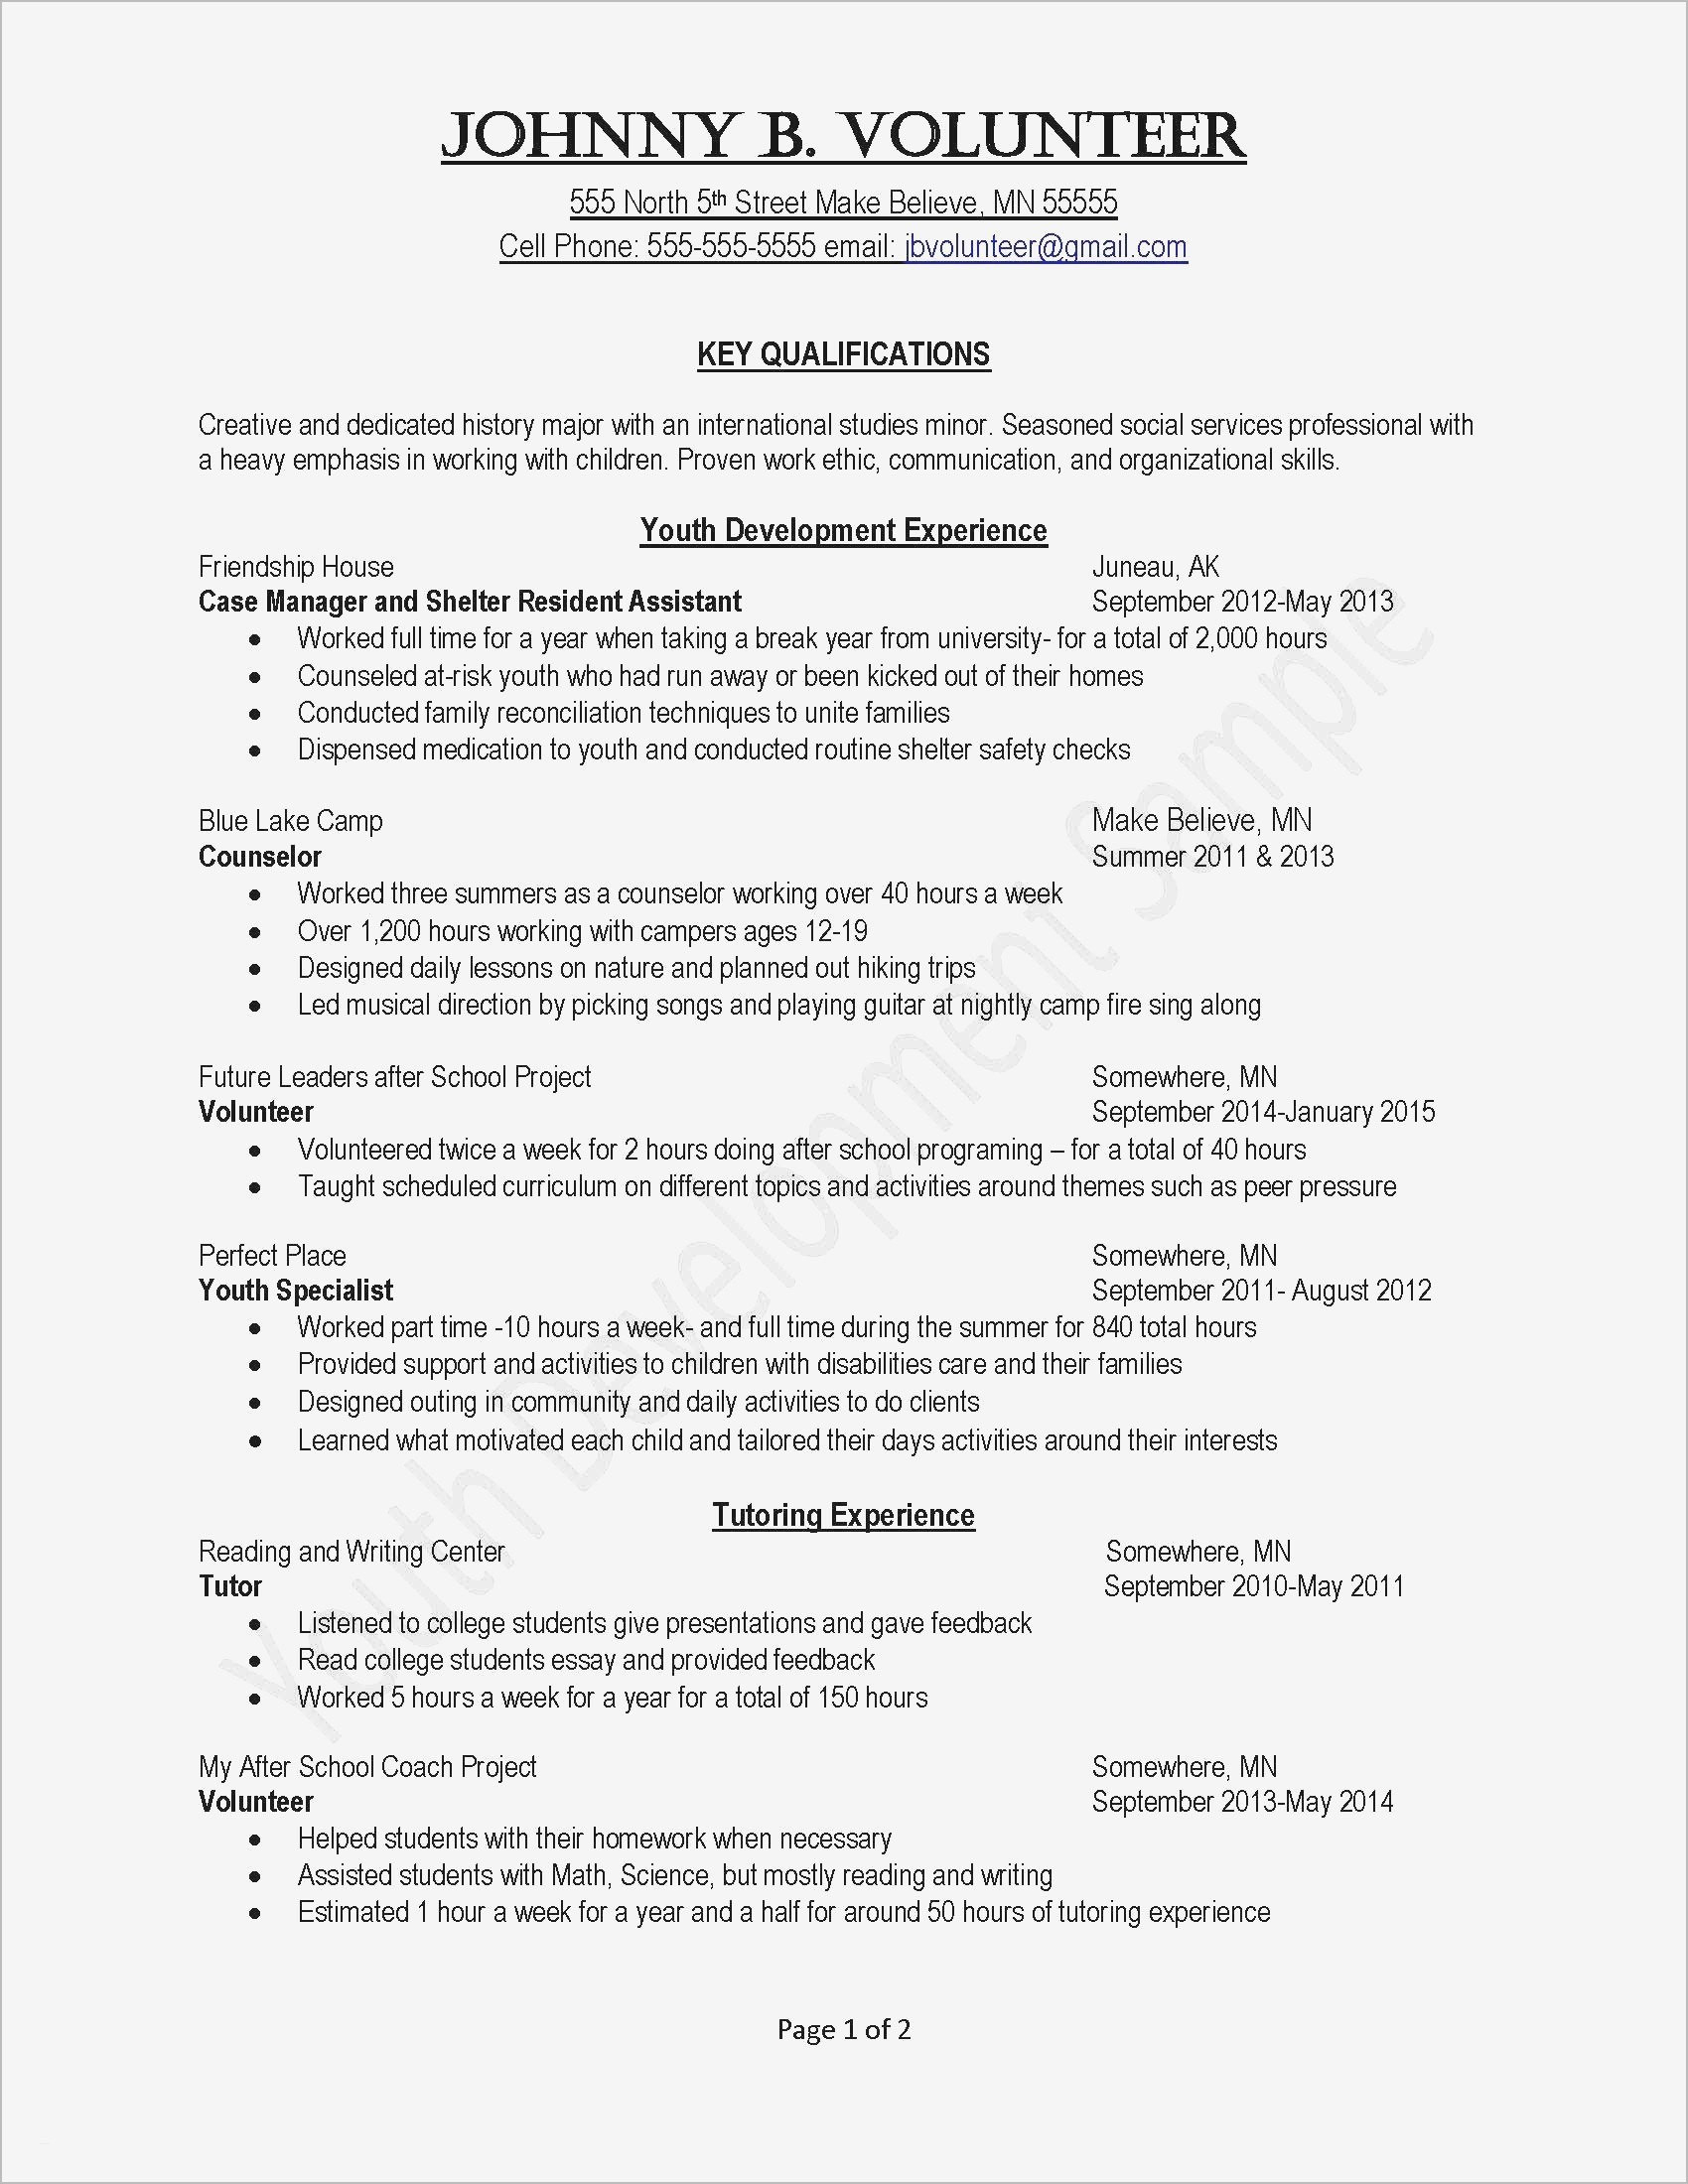 Professional Resume and Cover Letter Template - Unique Cover Letter for Resume Template Free